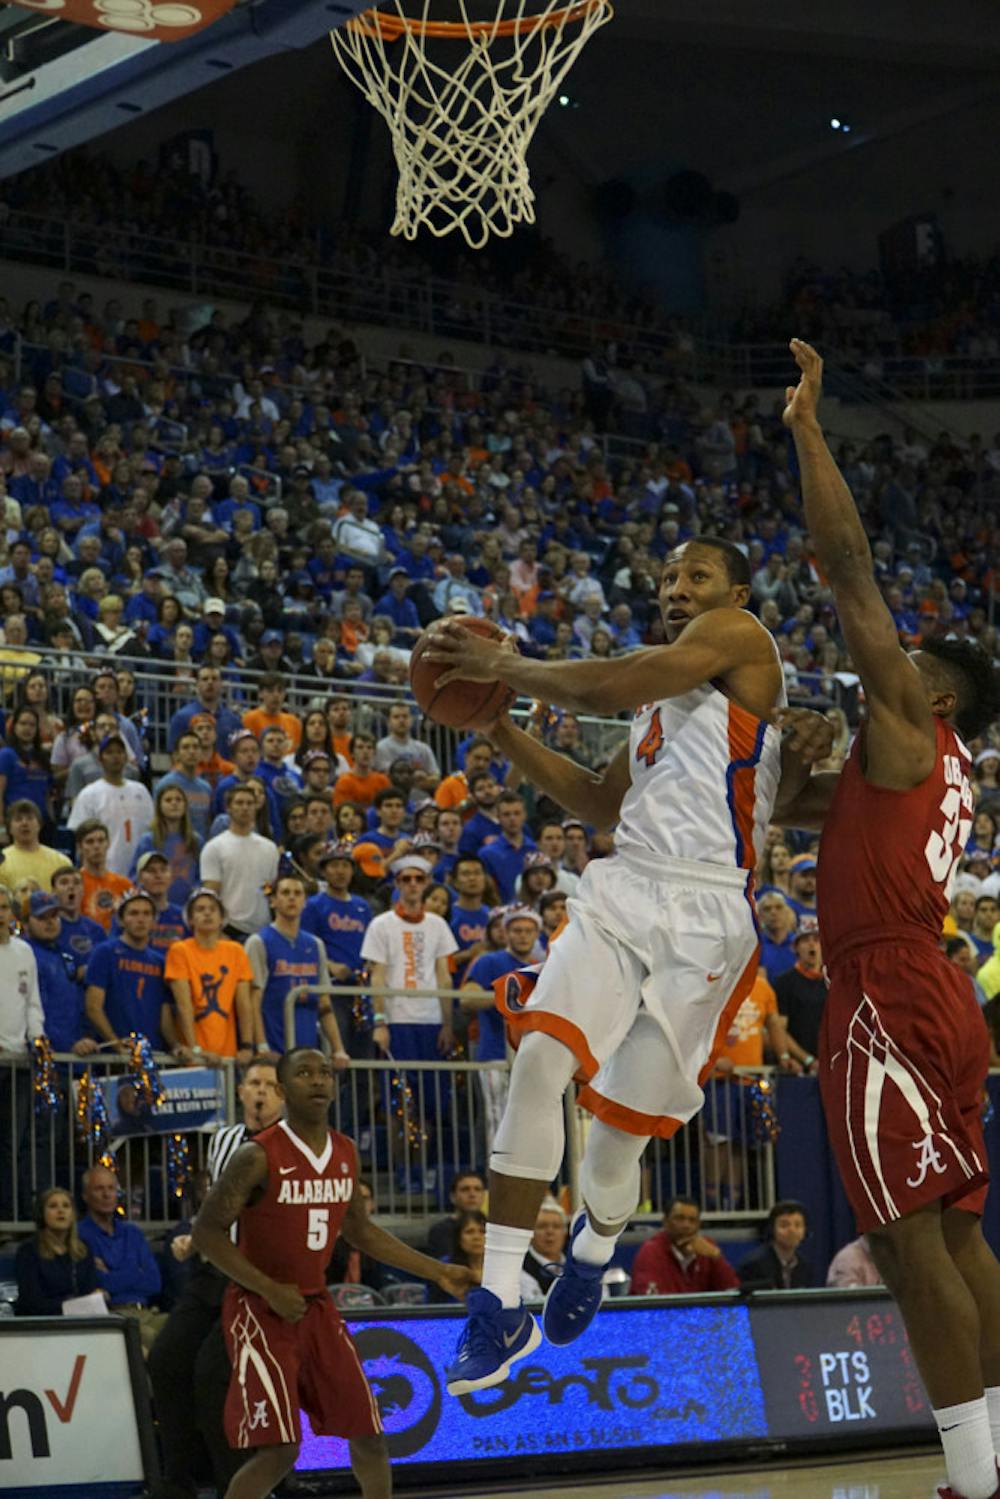 <p>UF guard KeVaughn Allen attempts a layup during Florida's 61-55 loss to Alabama on Feb. 13, 2016, in the O'Connell Center. </p>